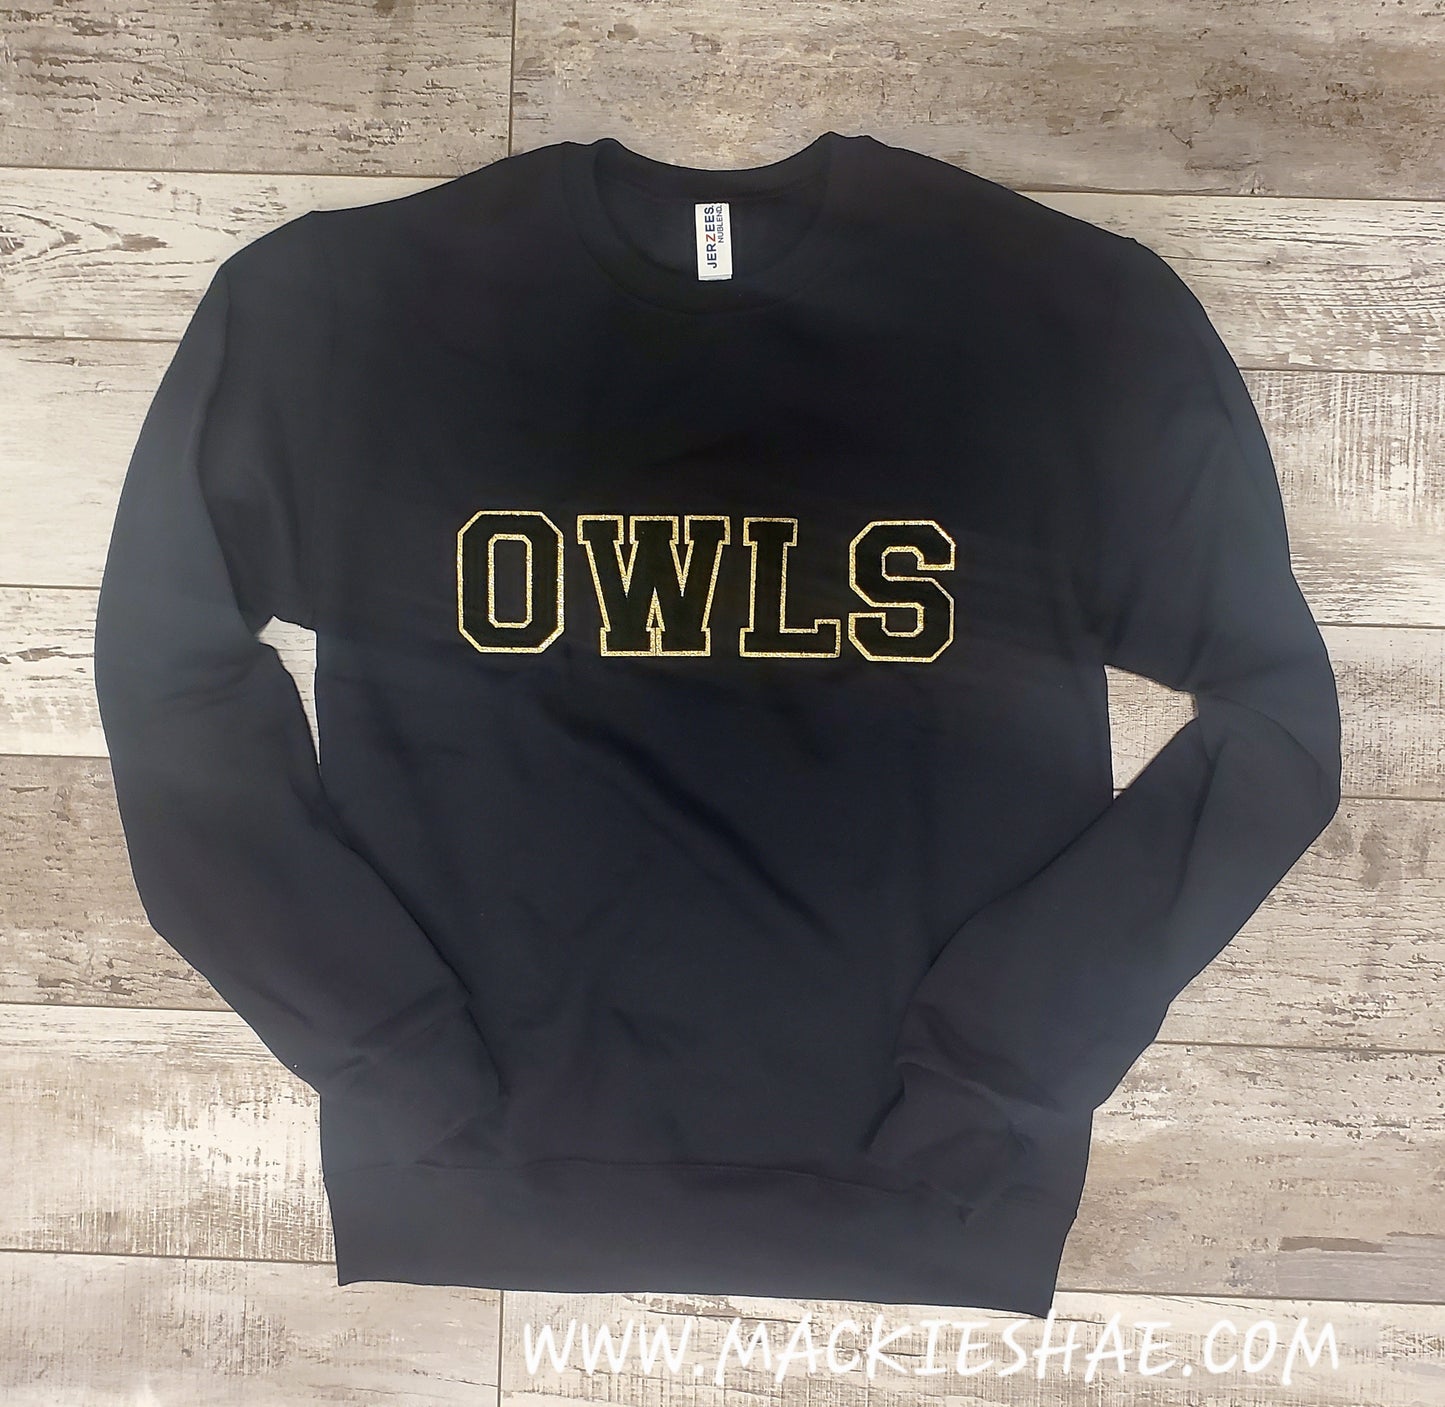 Garden Plain OWLS Chenille Patch Crewneck Sweatshirt for Youth and Adults